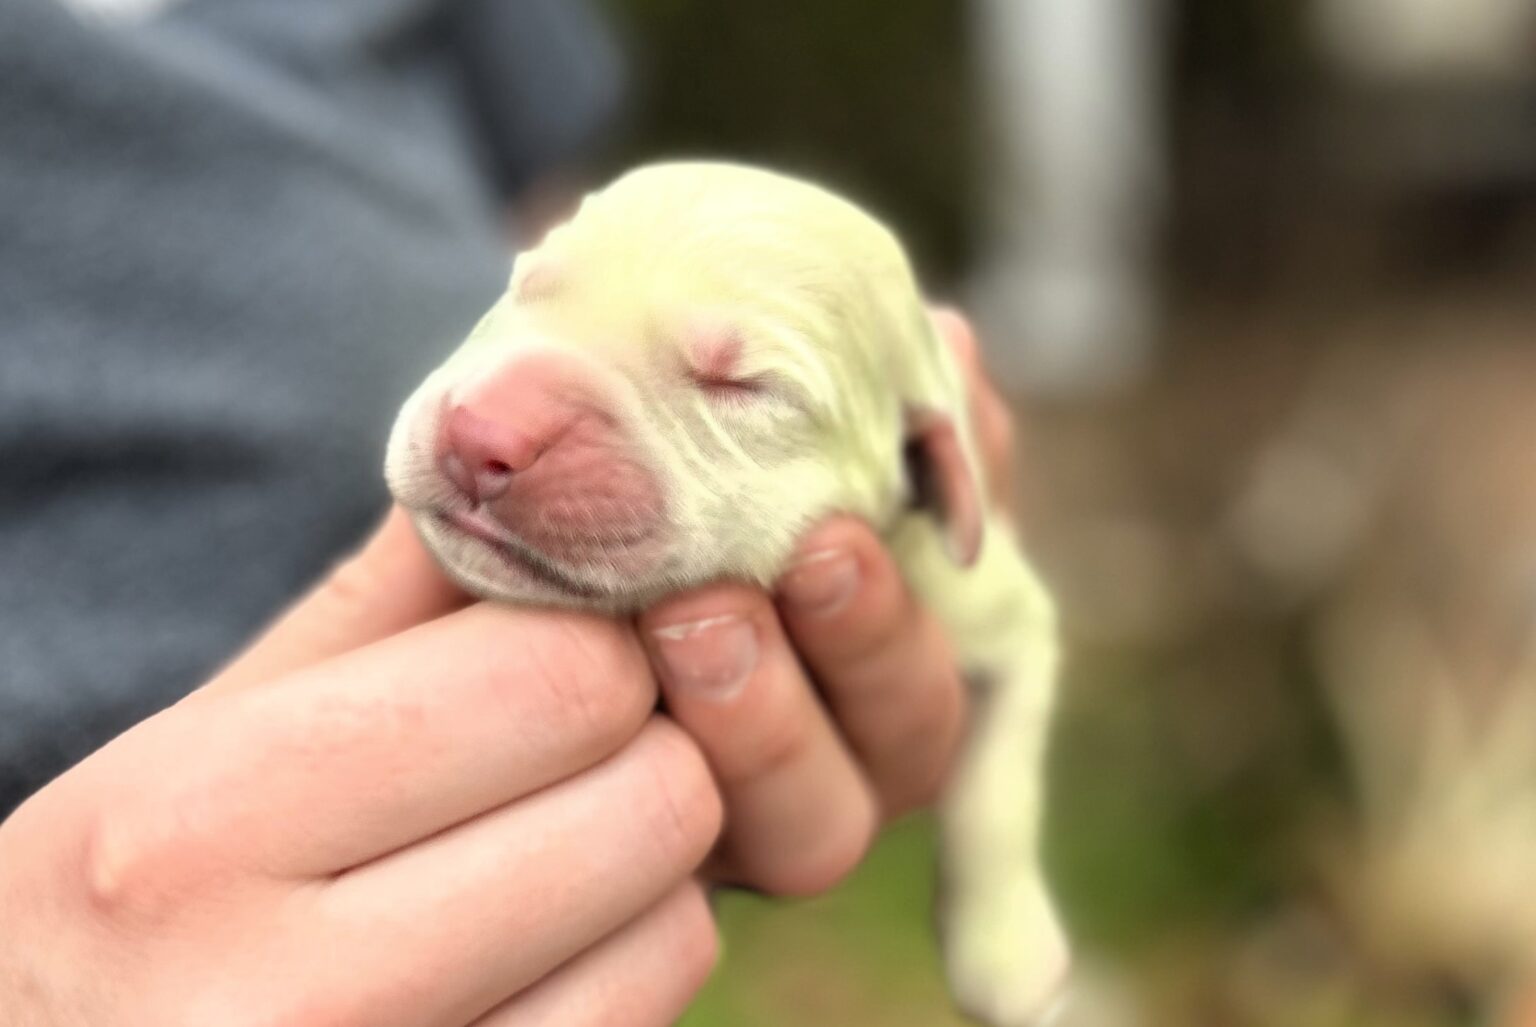 Golden retriever in Florida gives birth to rare lime green puppy named Shamrock due to unusual pigmentation from bile in the womb.